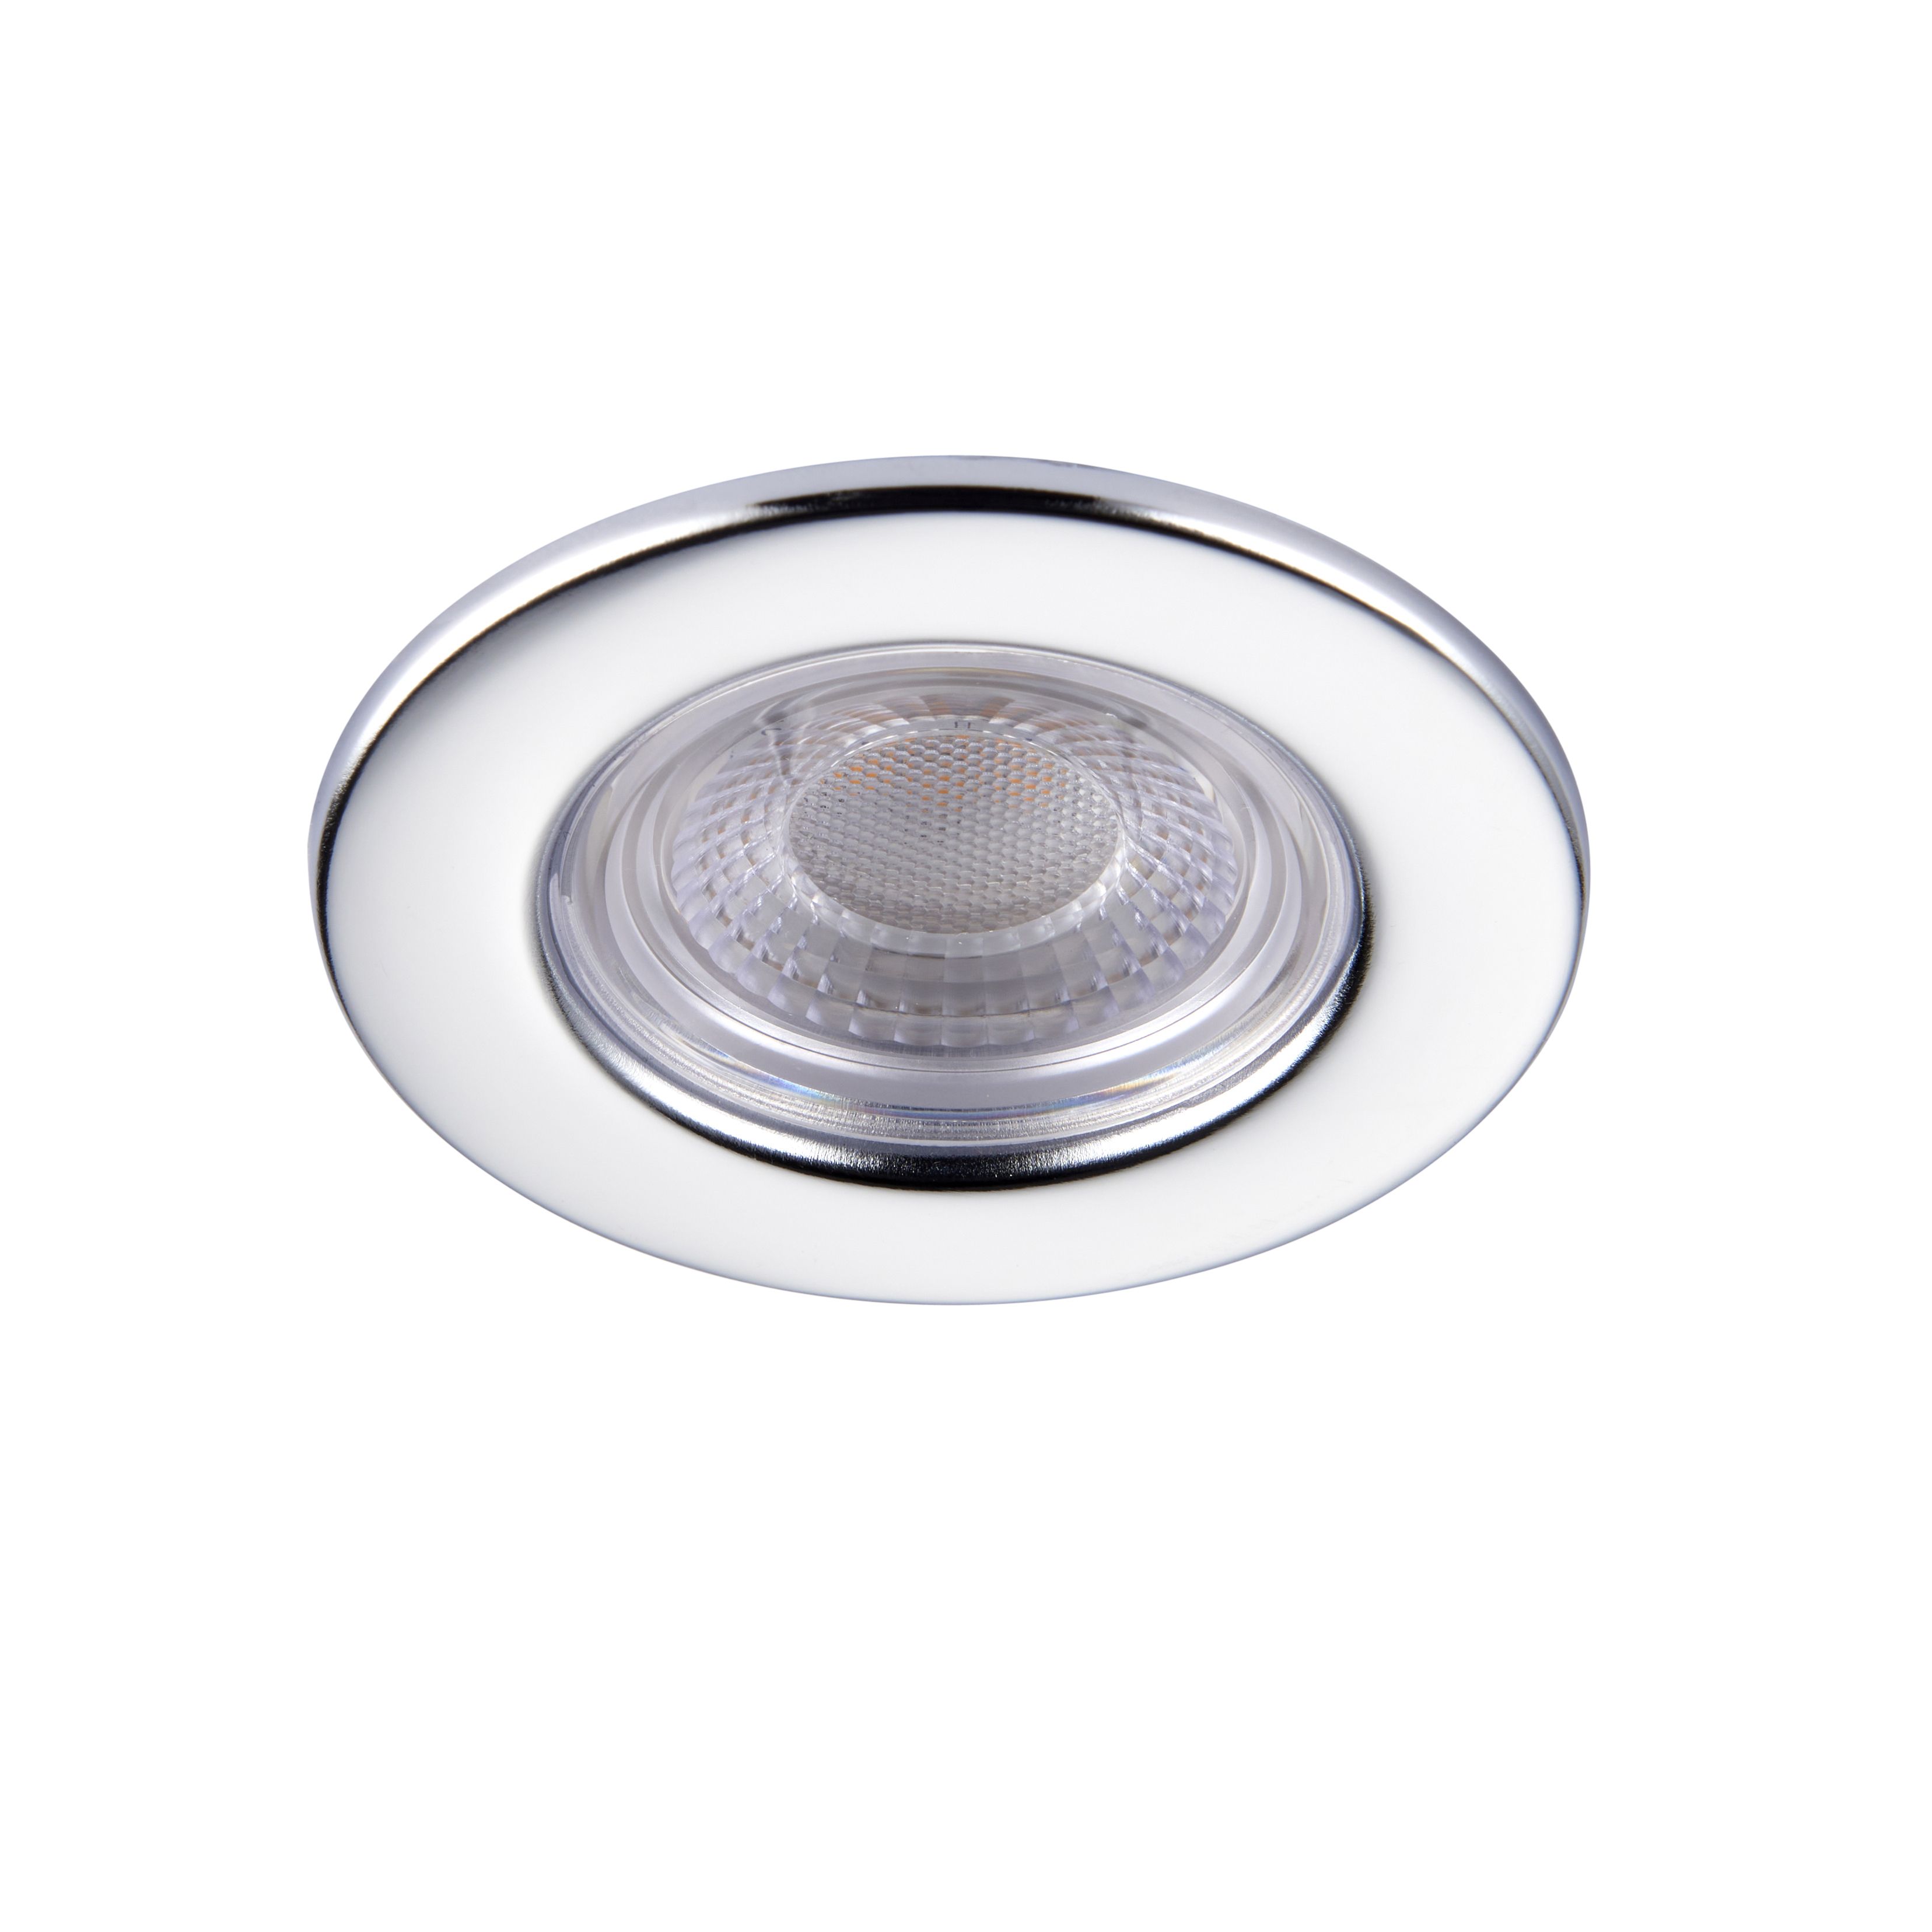 GuardECO Chrome effect Non-adjustable LED Cool white Downlight 6W IP65